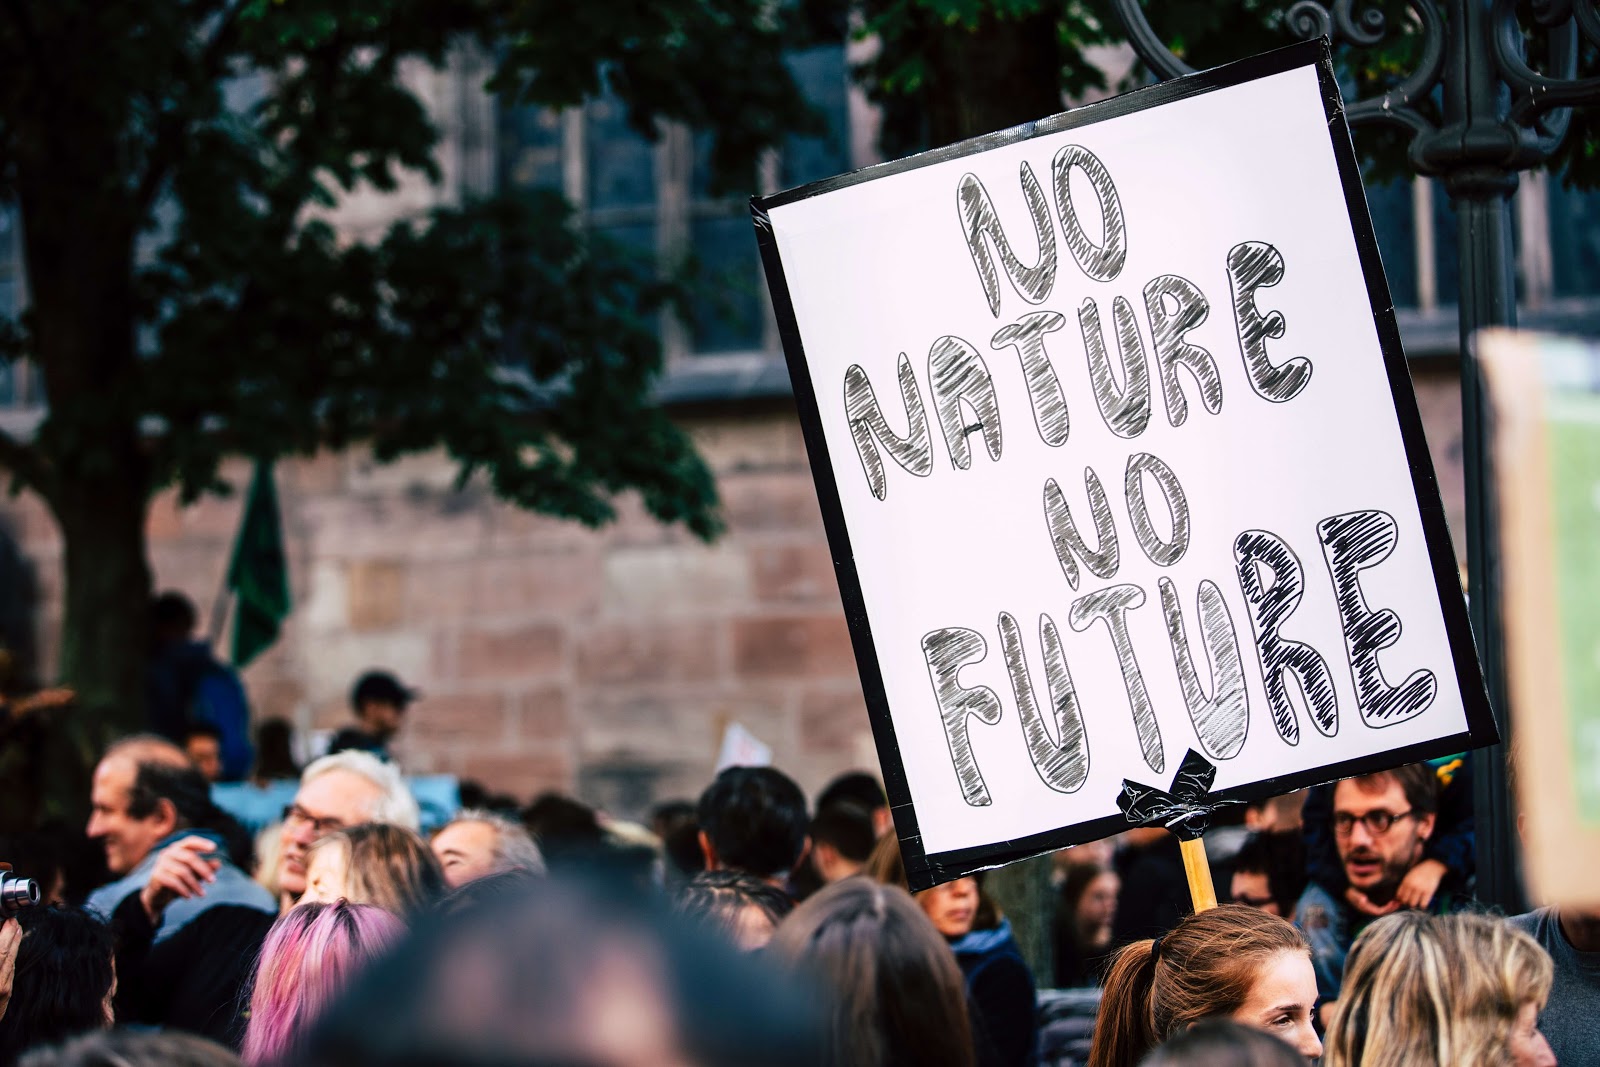 Protesters with a sign saying "No nature no future"